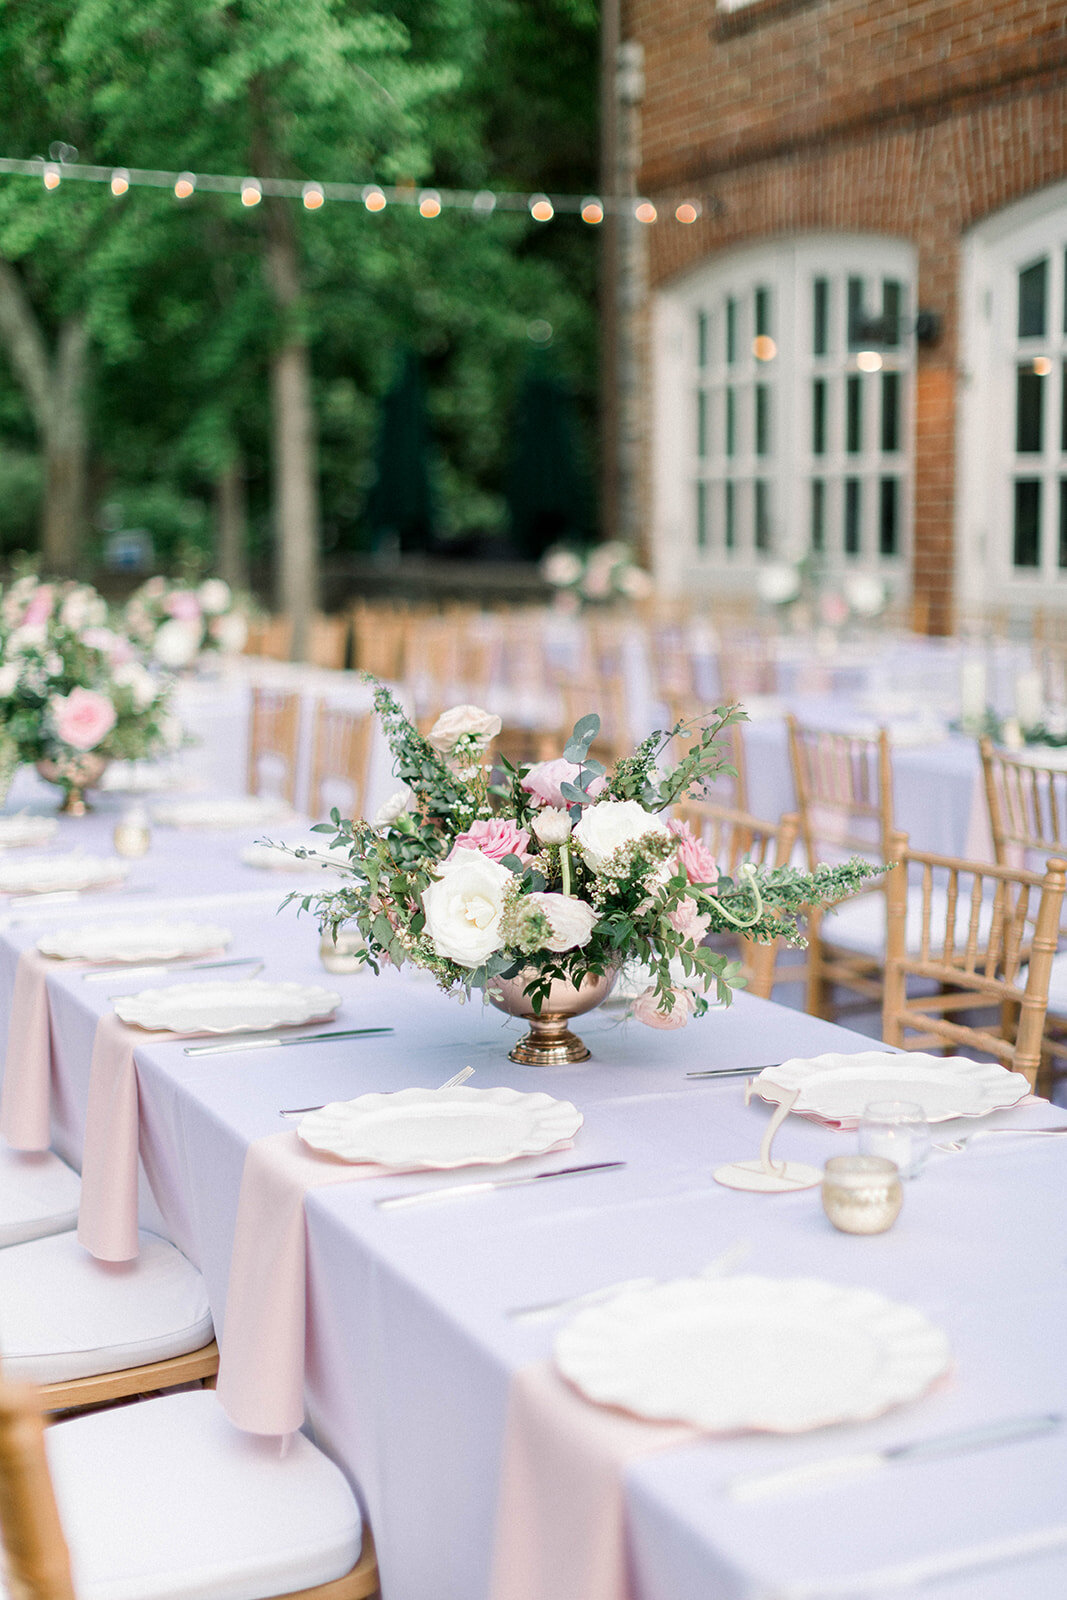 This courtyard reception has eucalyptus garlands filled with blush and white flowers along with centerpieces of pink peonies, ivory garden roses, heirloom carnations, and hydrangea. Designed by Rosemary & Finch in Nashville, TN.